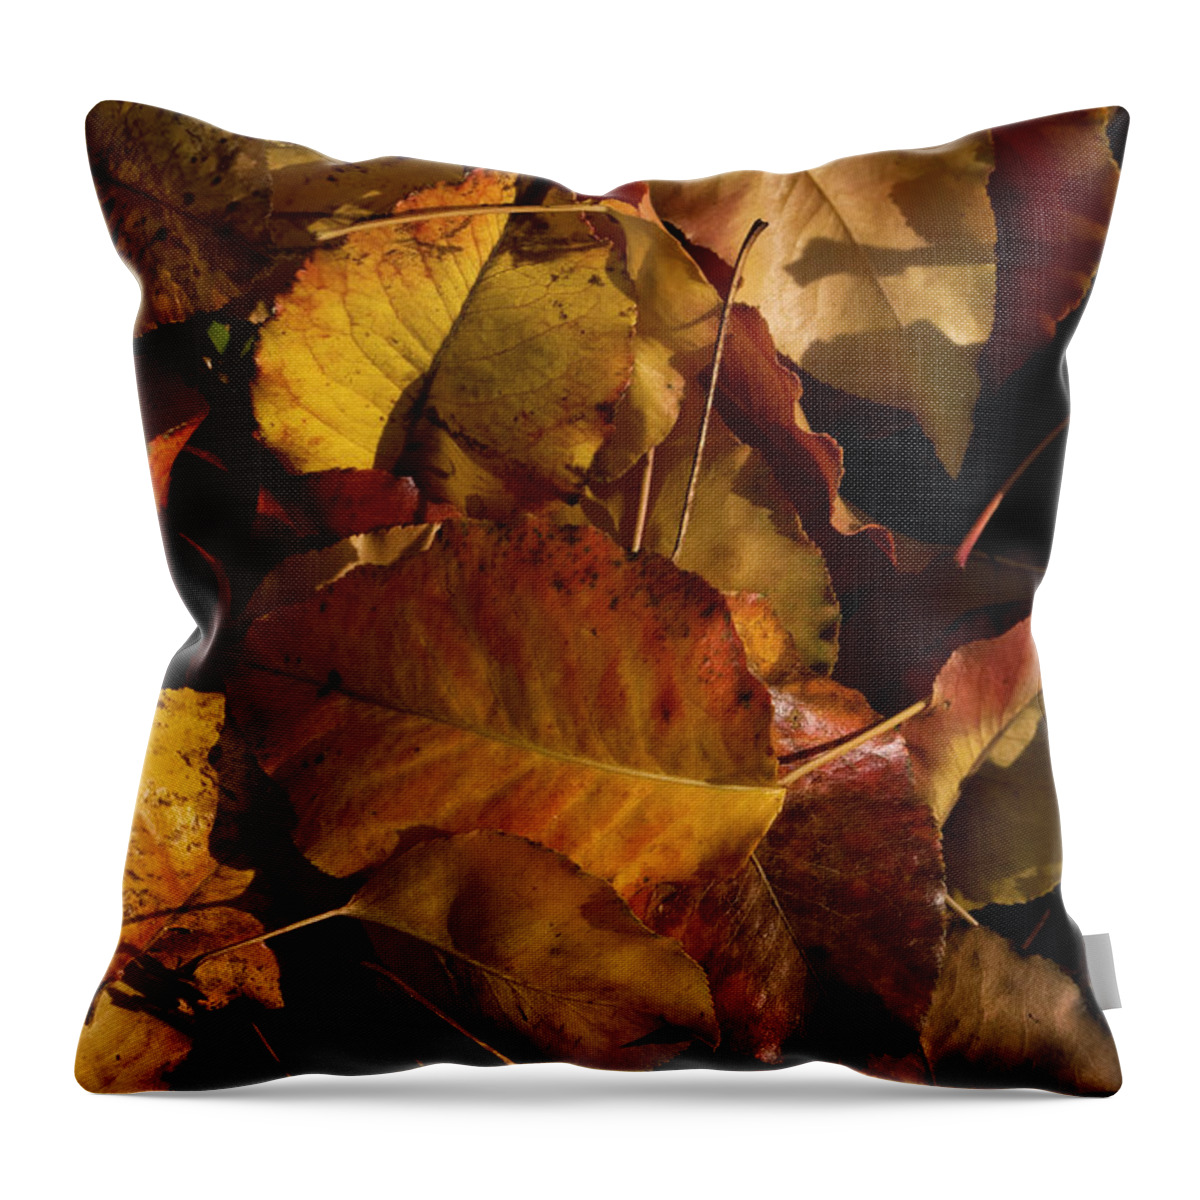 Leaves Throw Pillow featuring the photograph Autumn Leaves by Cheryl Day